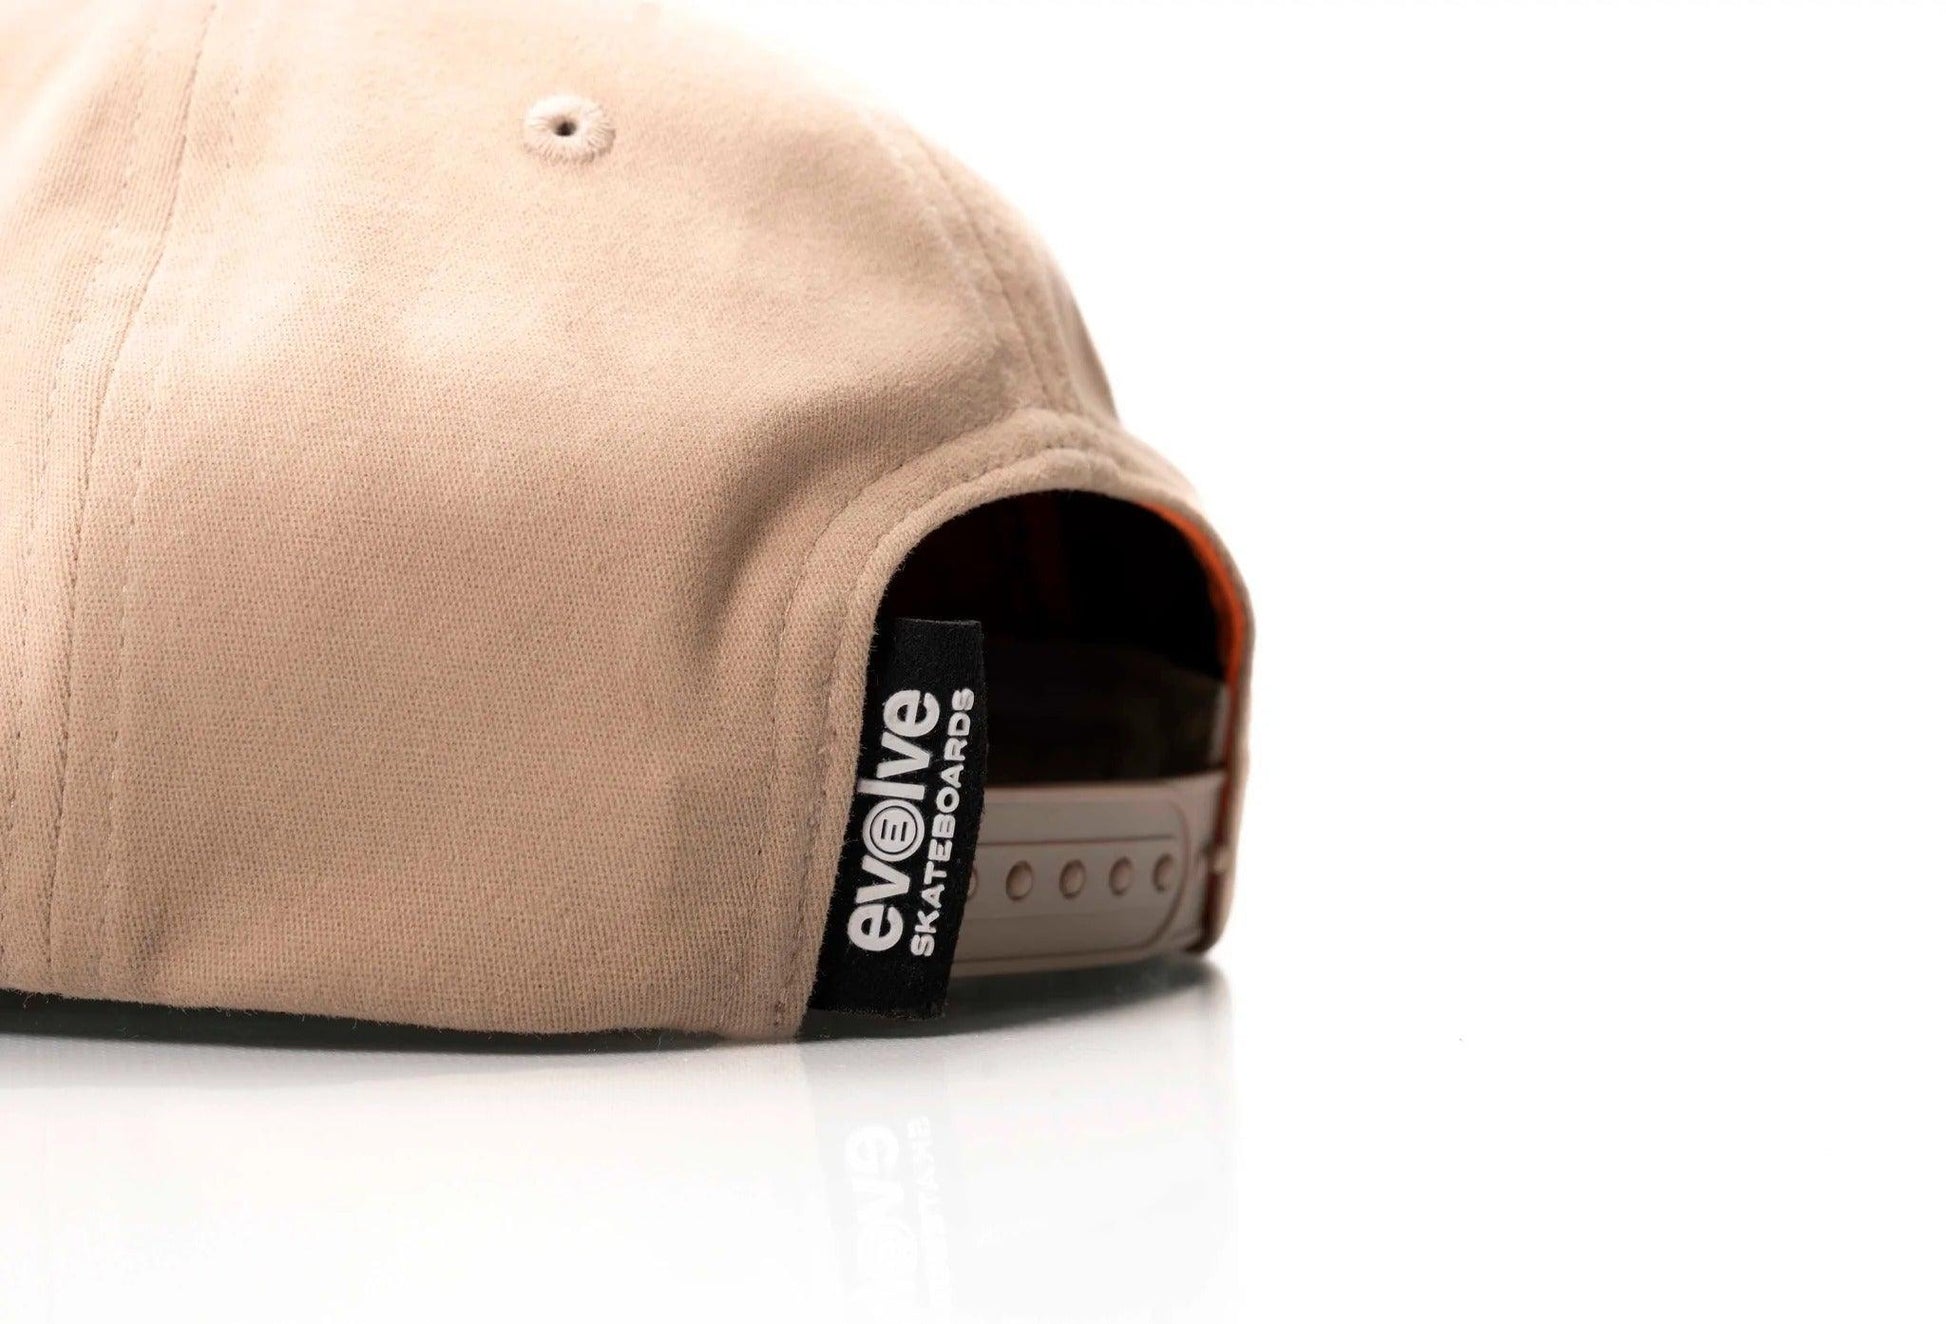 Evolve Capacitor Hat -  - Apparel - Electric Monkey NZ